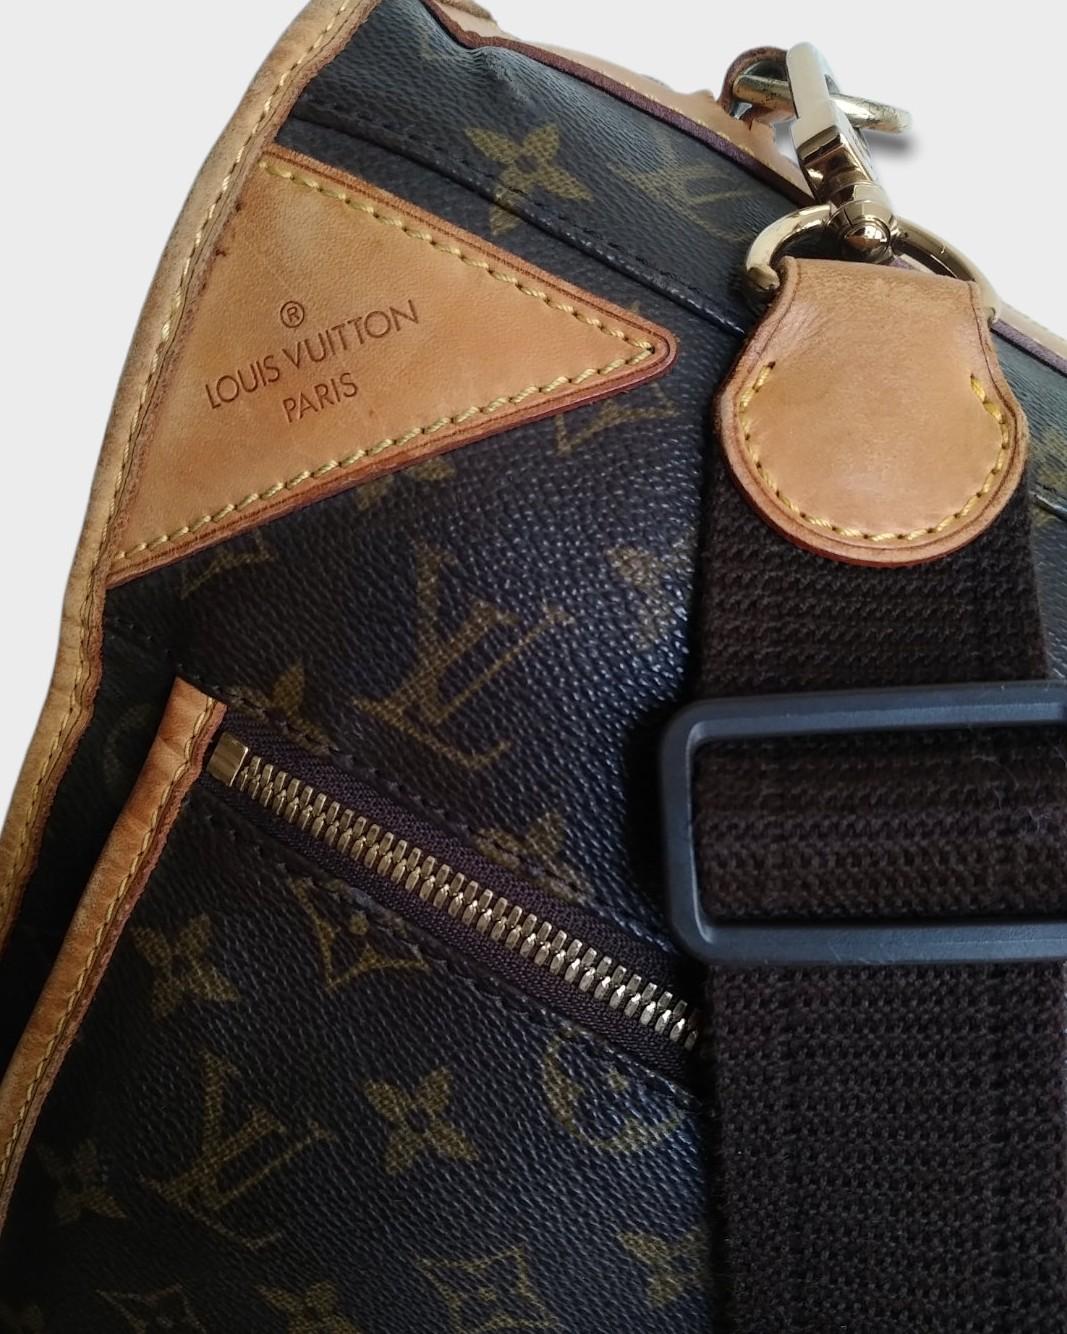 Louis Vuitton Monogram Canvas Garment Travel Carrier - 3 Hangers. 2001
- 100% authentic Louis Vuitton
- Monogram coated canvas with natural leather trim
- Single leather top handle and a removable, adjustable canvas strap
- LV engraved goldtone